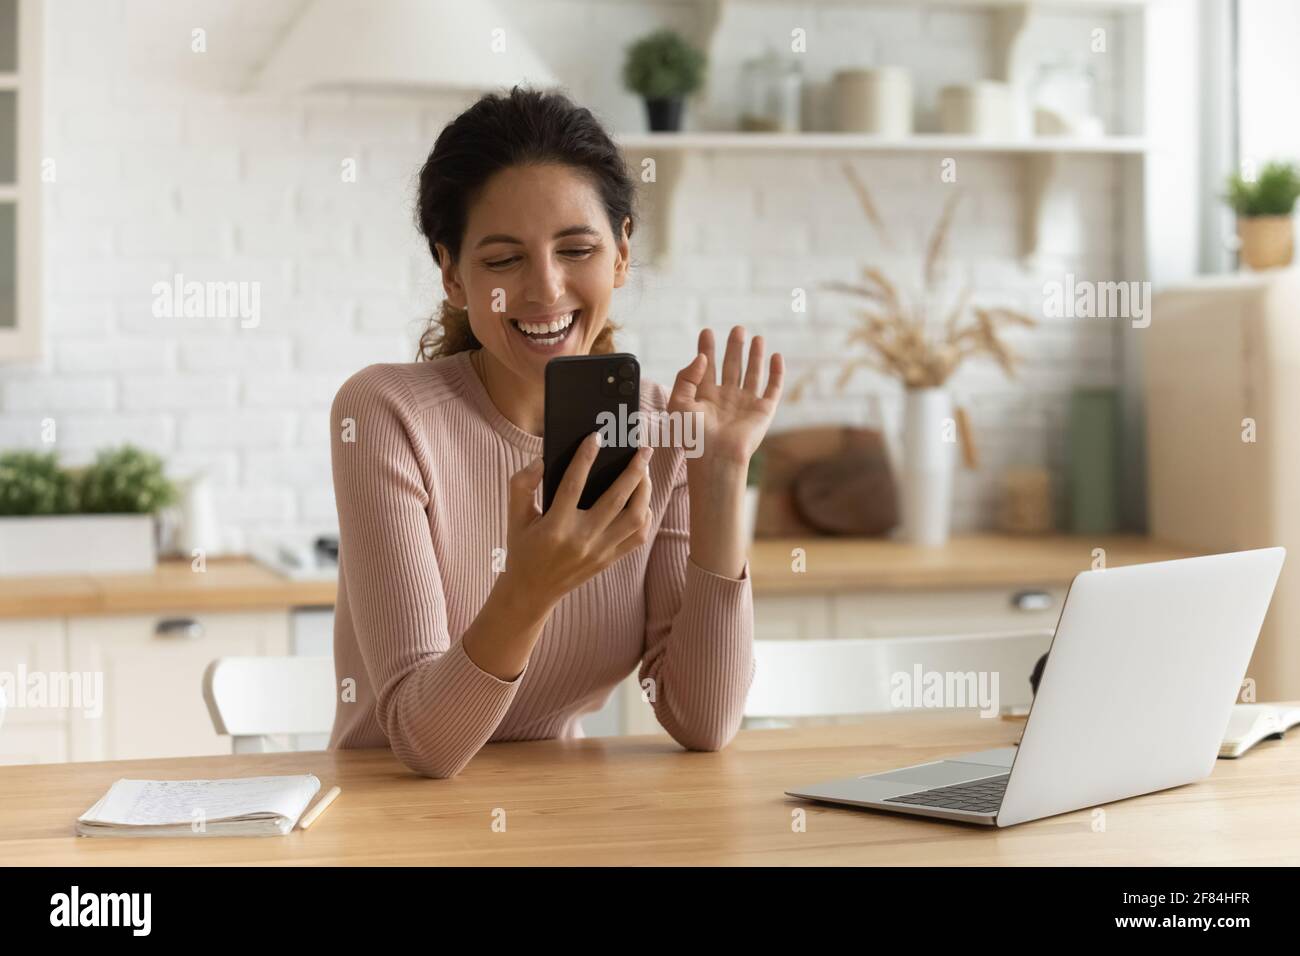 Positive latina lady chat online greet friend by video call Stock Photo